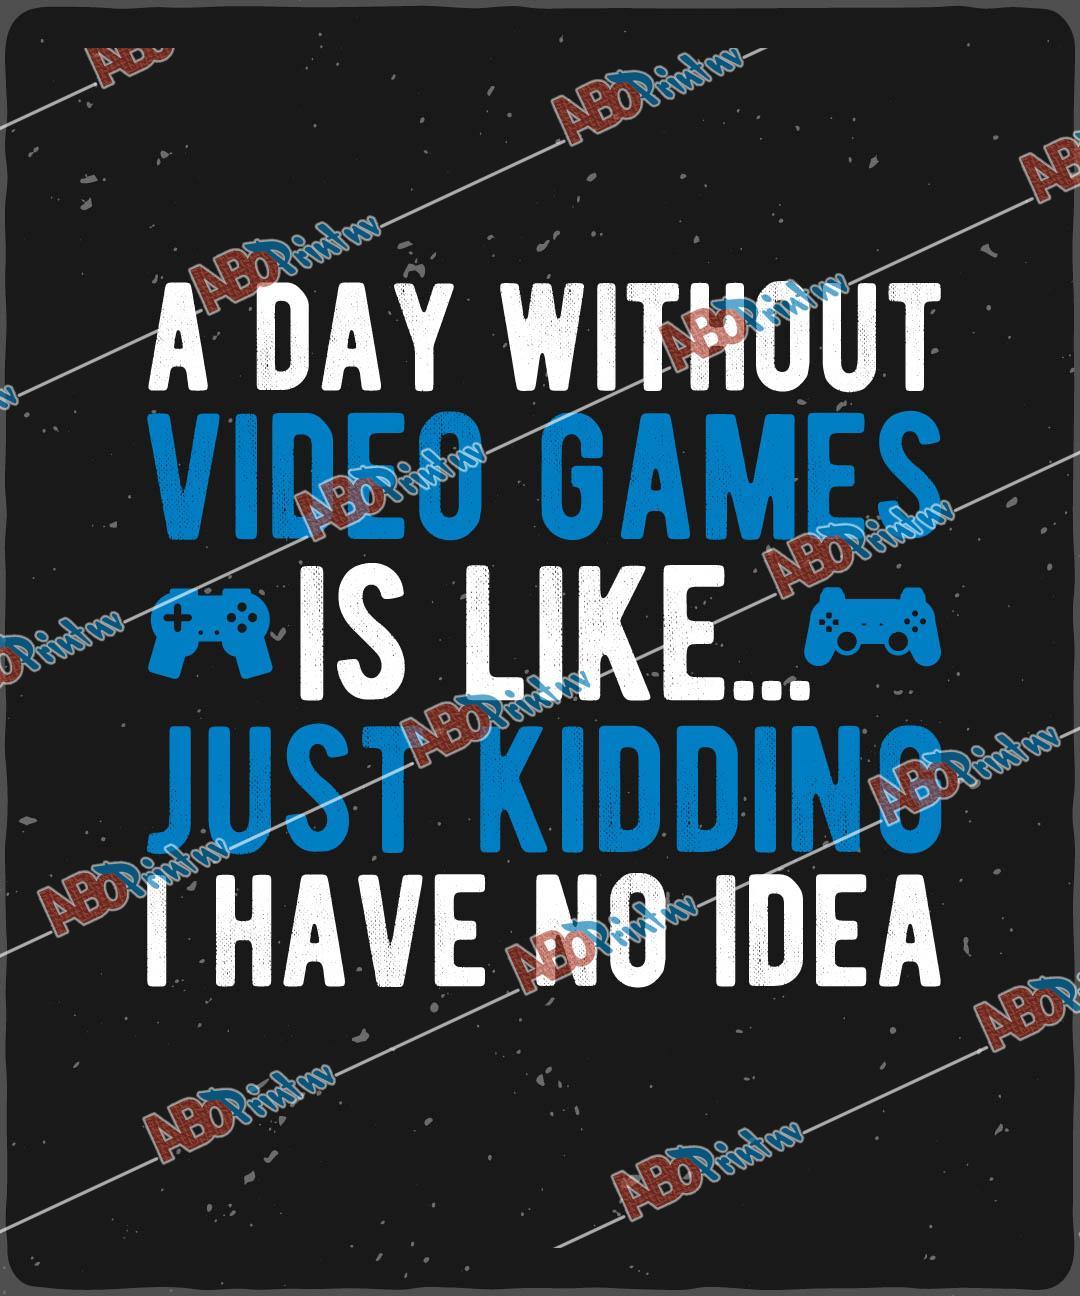 A day without video games is like just kidding I have no idea.jpg